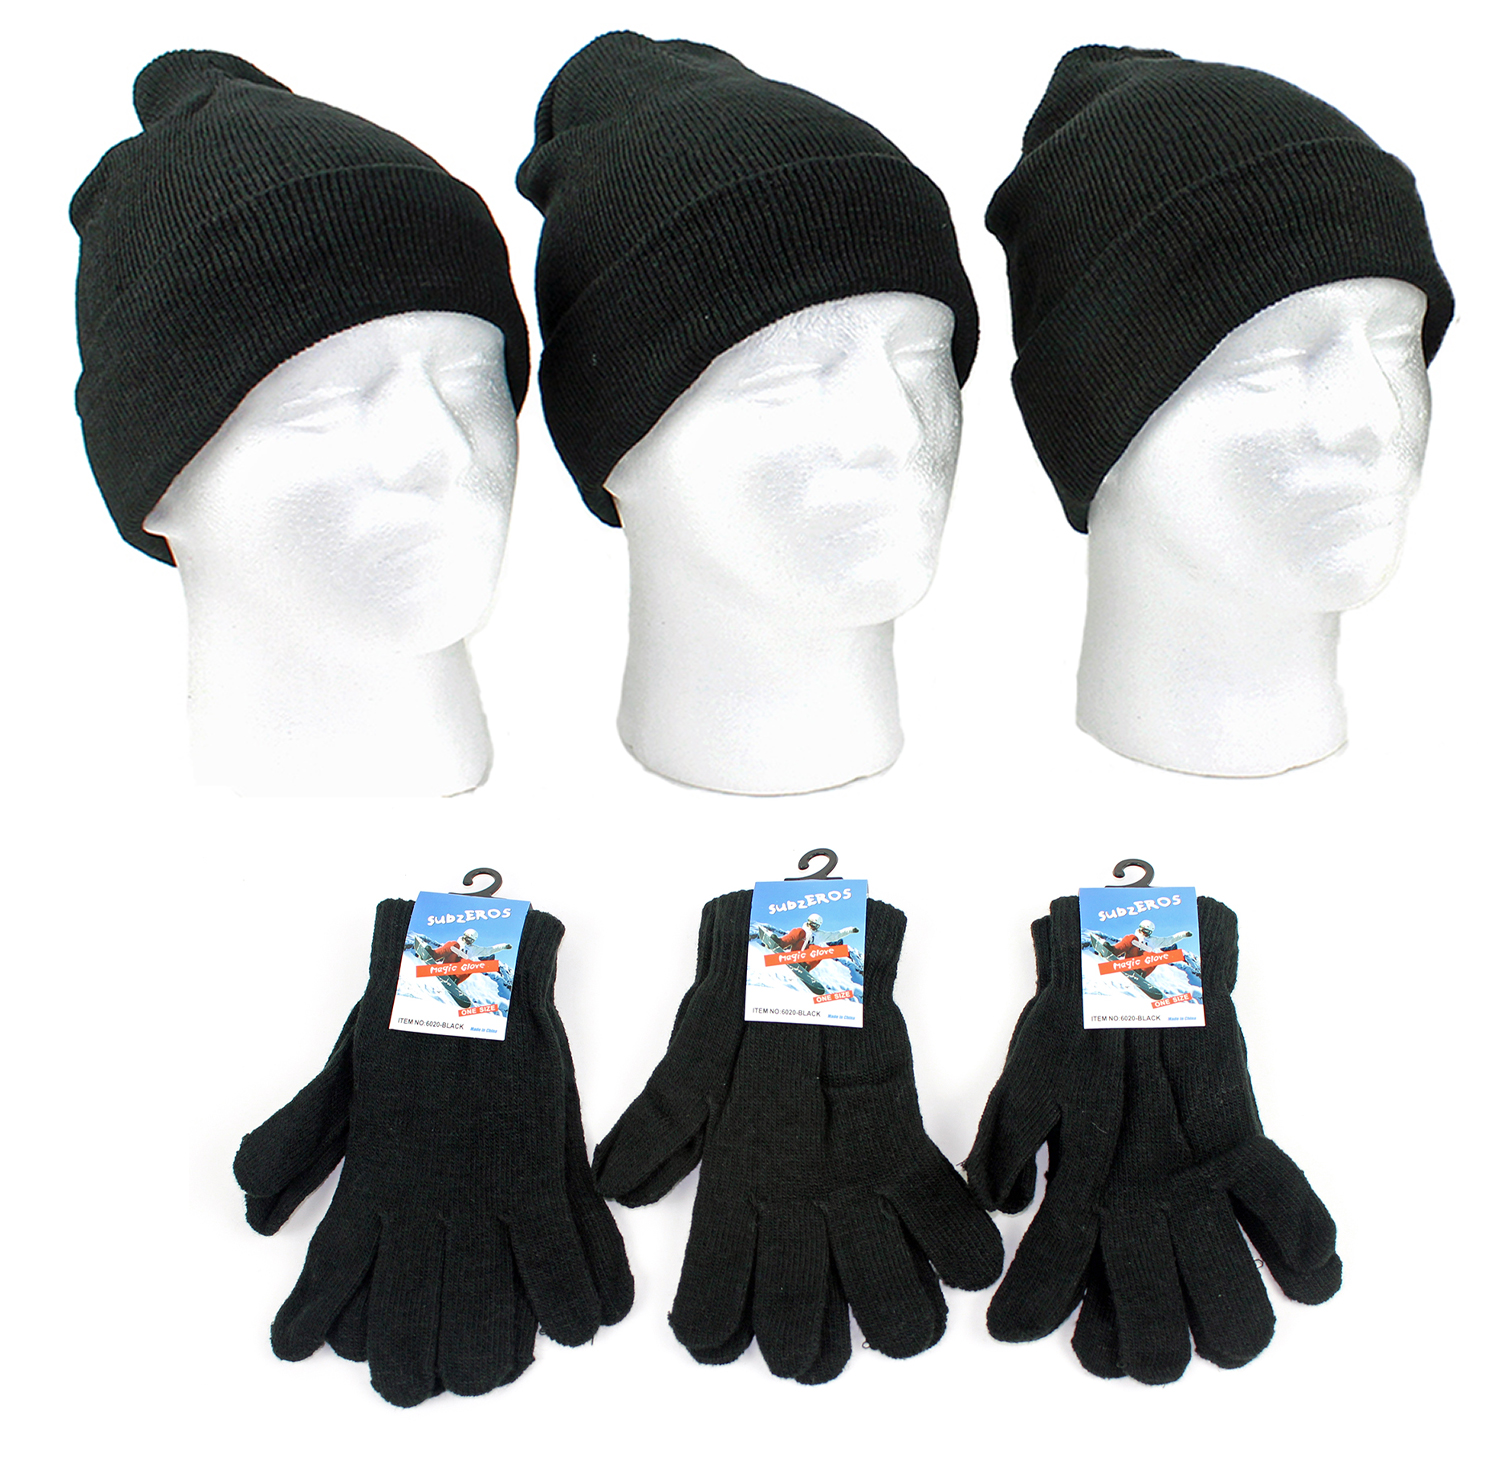 Adult Beanie Winter Knit HATs and Adult Magic Gloves Combo Packs